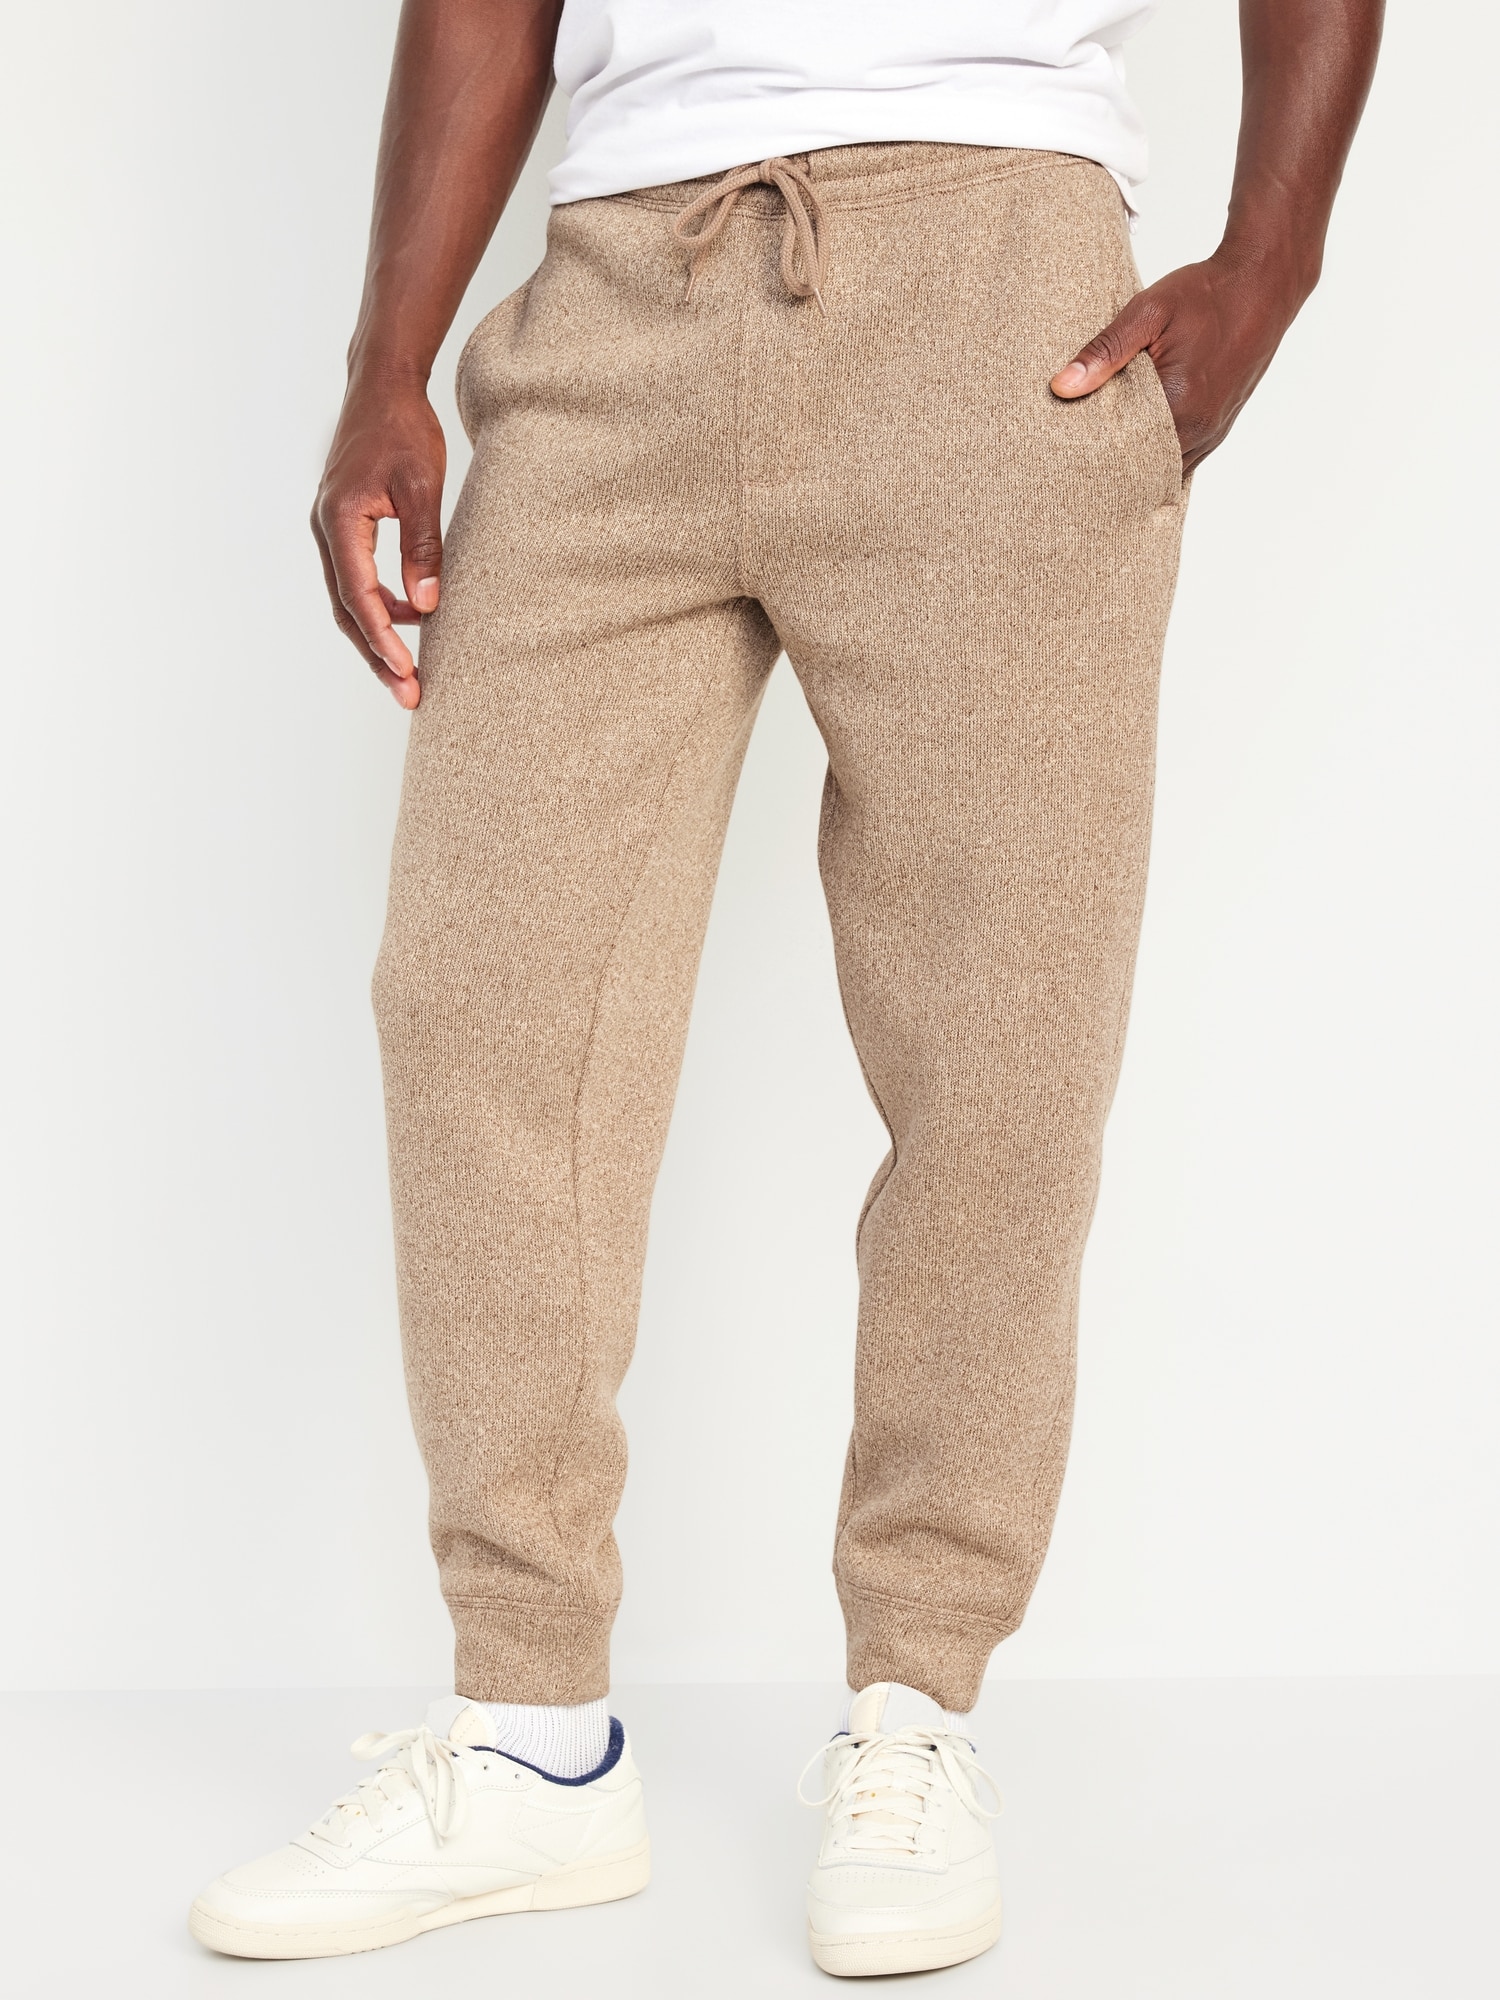 Sweater-Knit Performance Jogger Pants for Men